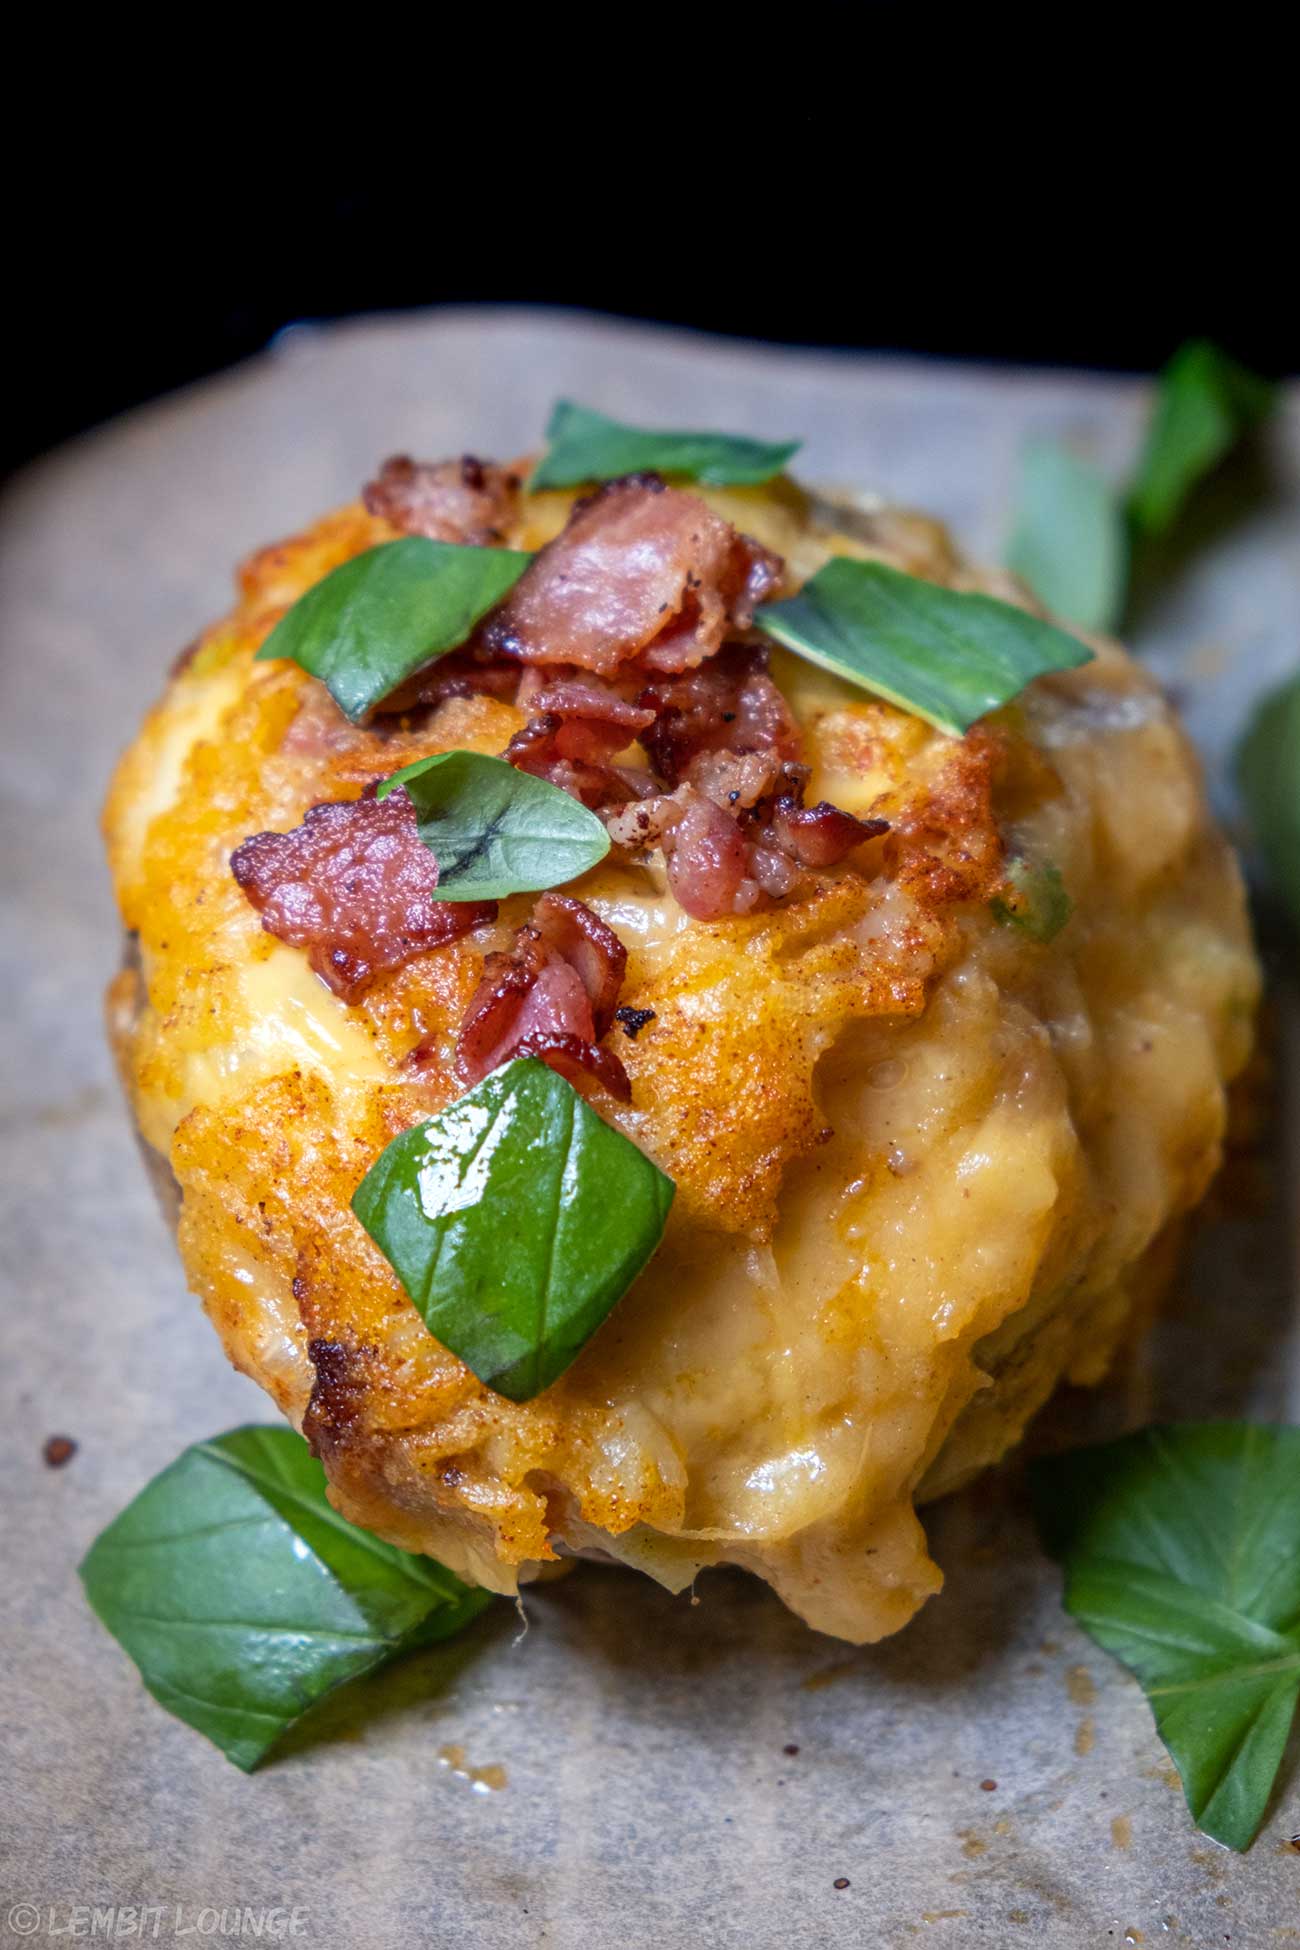 Double bubble baked potatoes cheddar cayenne ancho